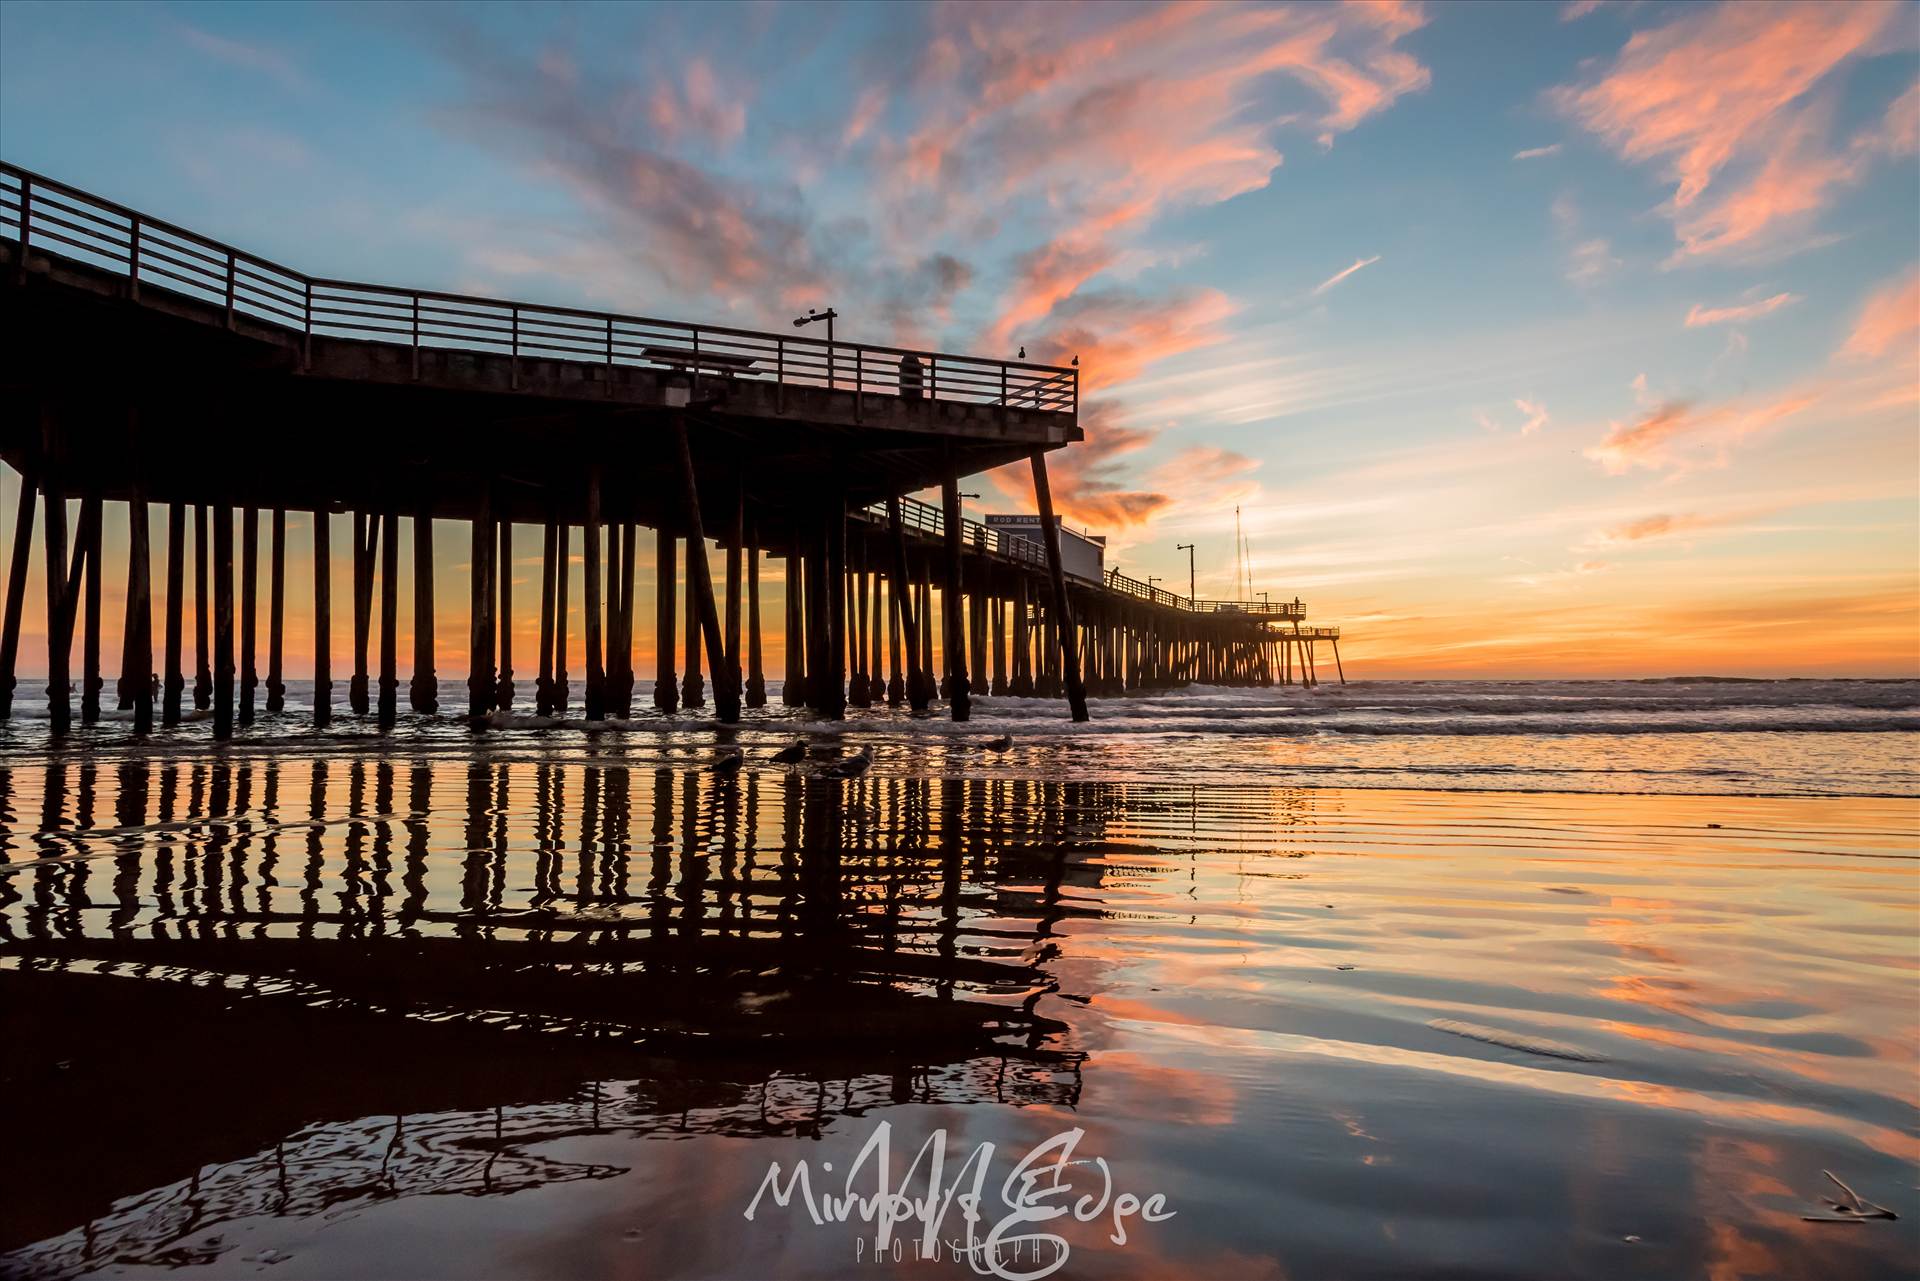 Fairytale Sunset Pismo Pier Reflection.jpg - undefined by Sarah Williams